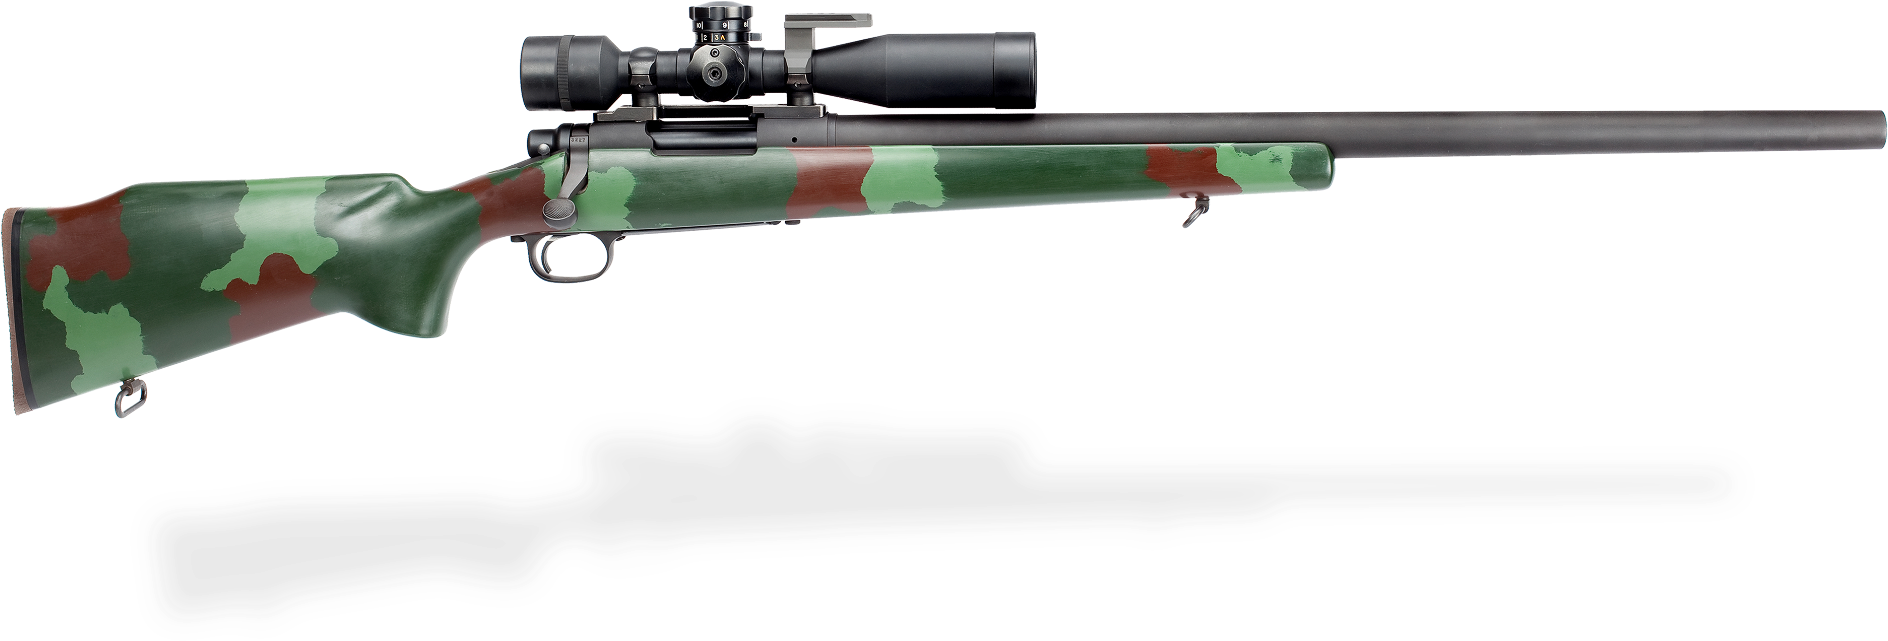 Camo Sniper Riflewith Scope PNG